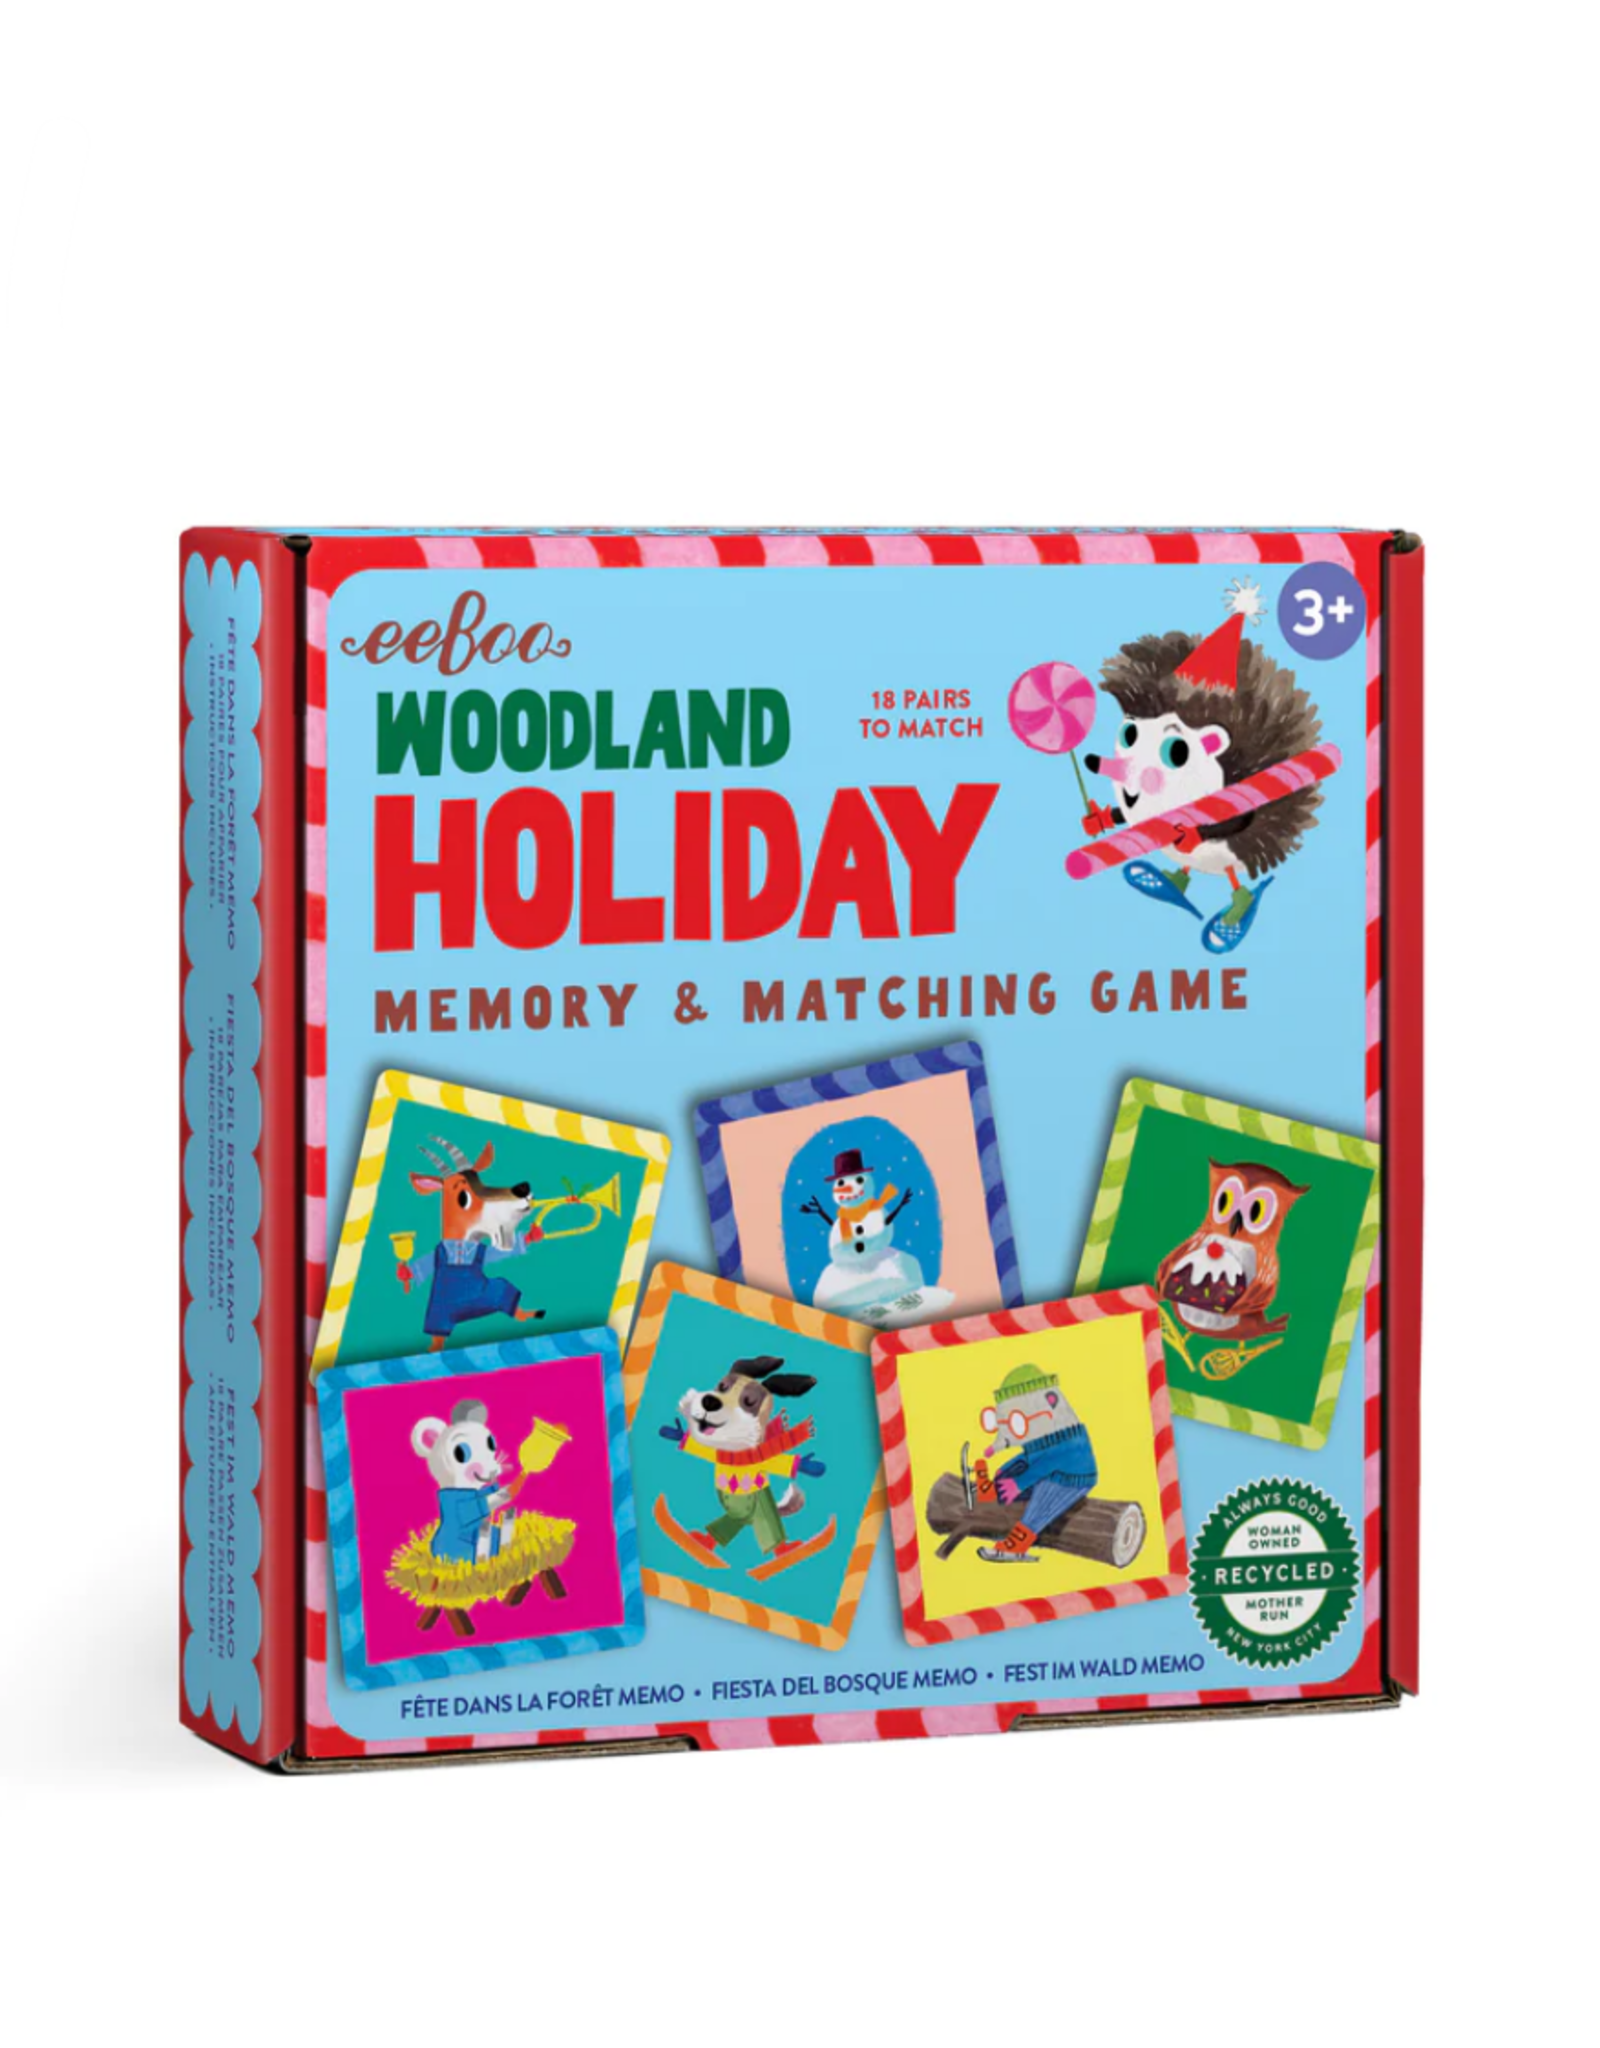 Woodland Holiday Little Memory Matching Game